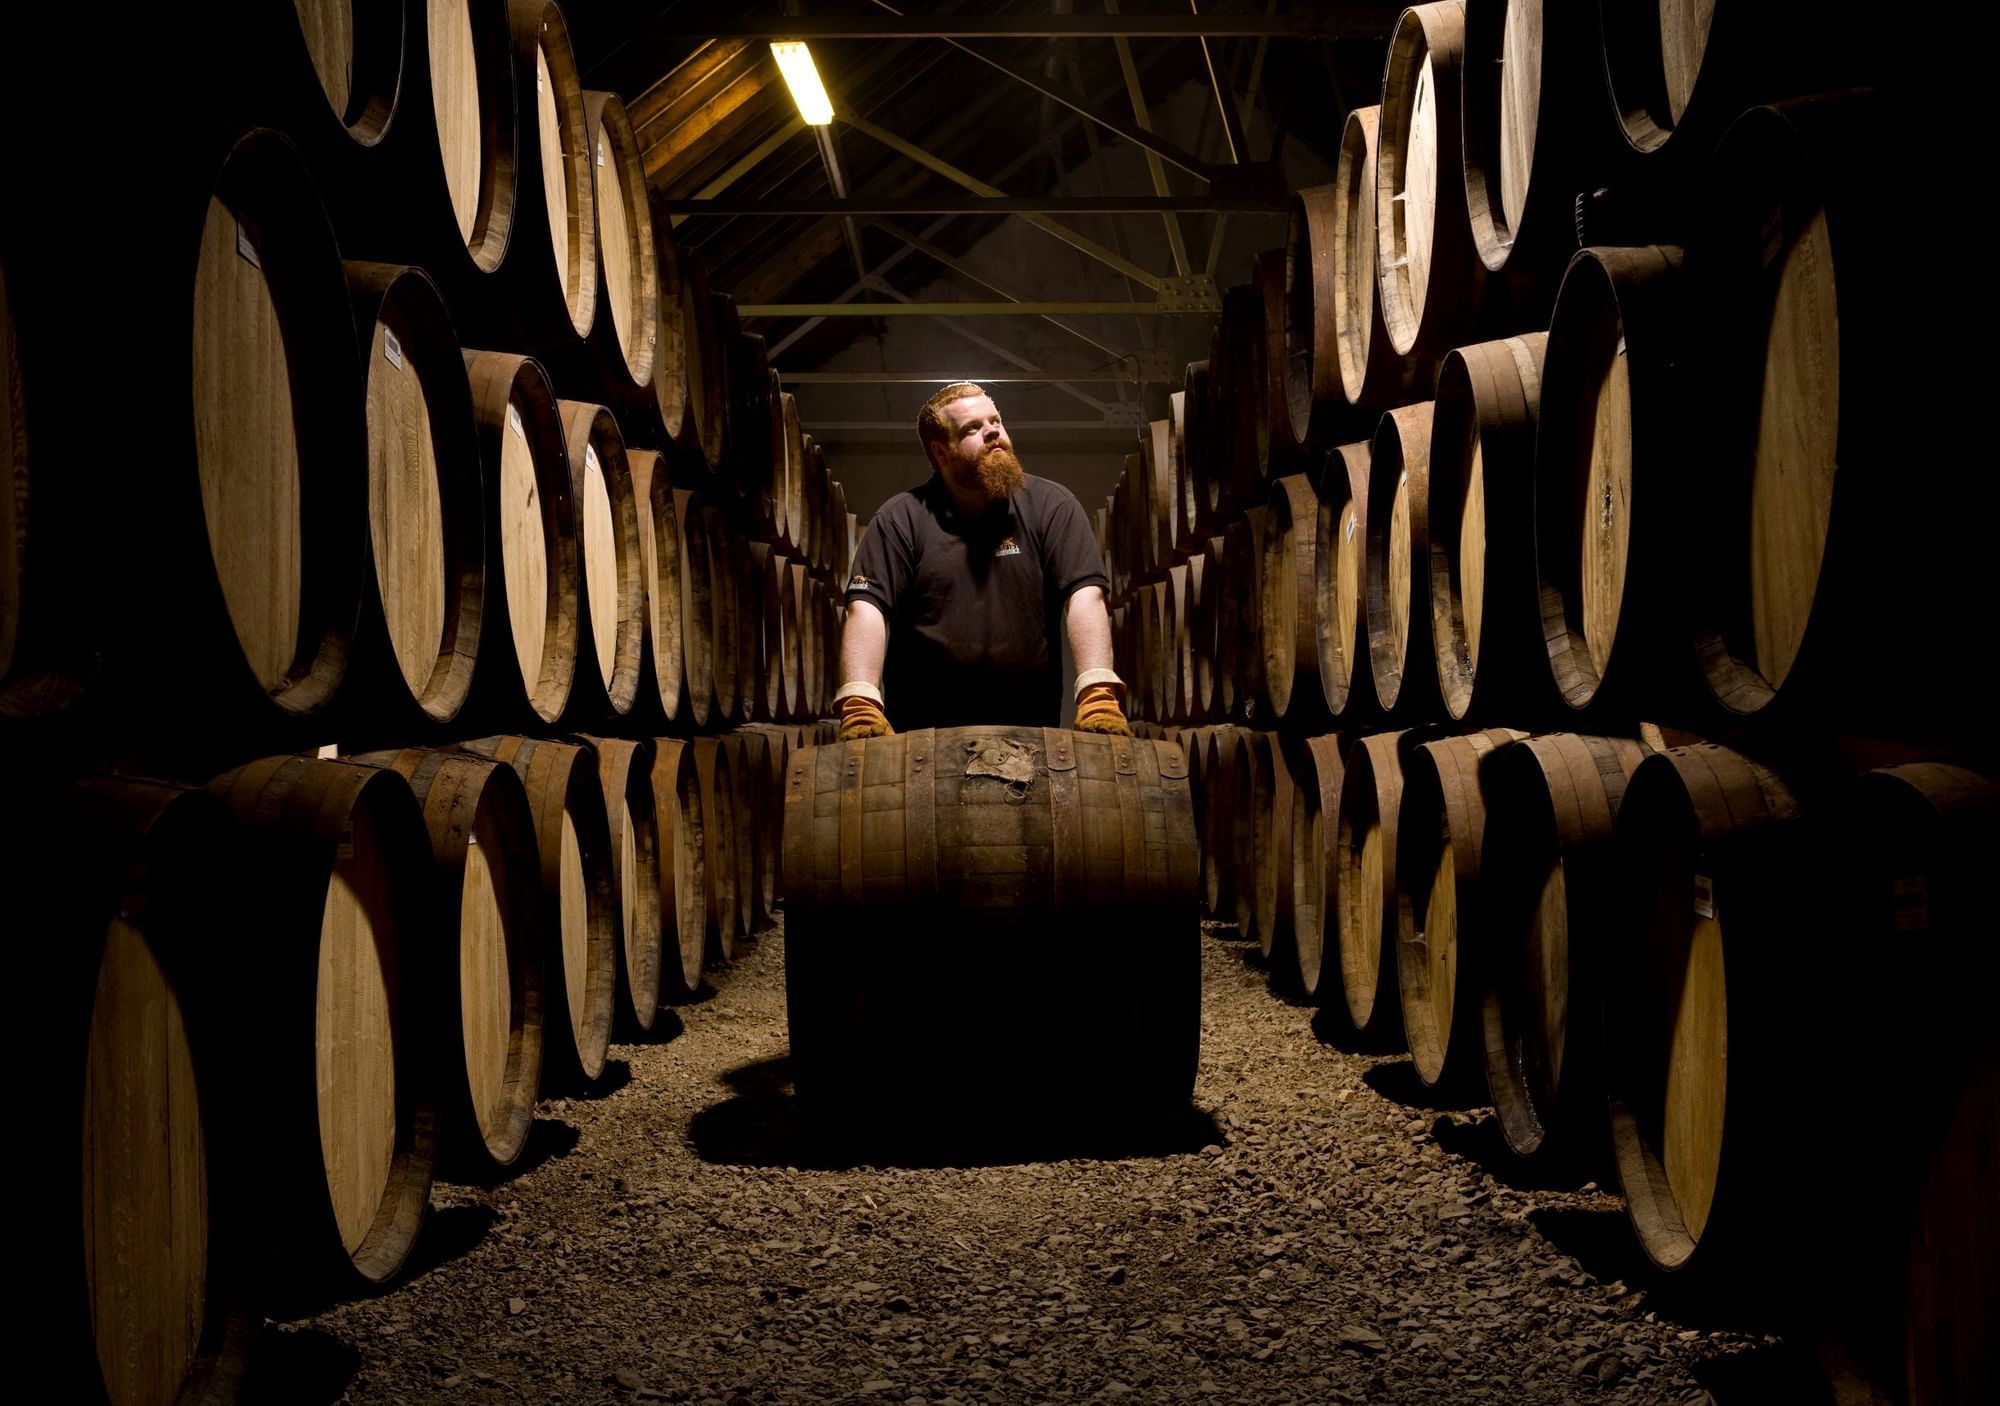 A man walking in the Glenfiddich Solera whisky production area at The Londoner